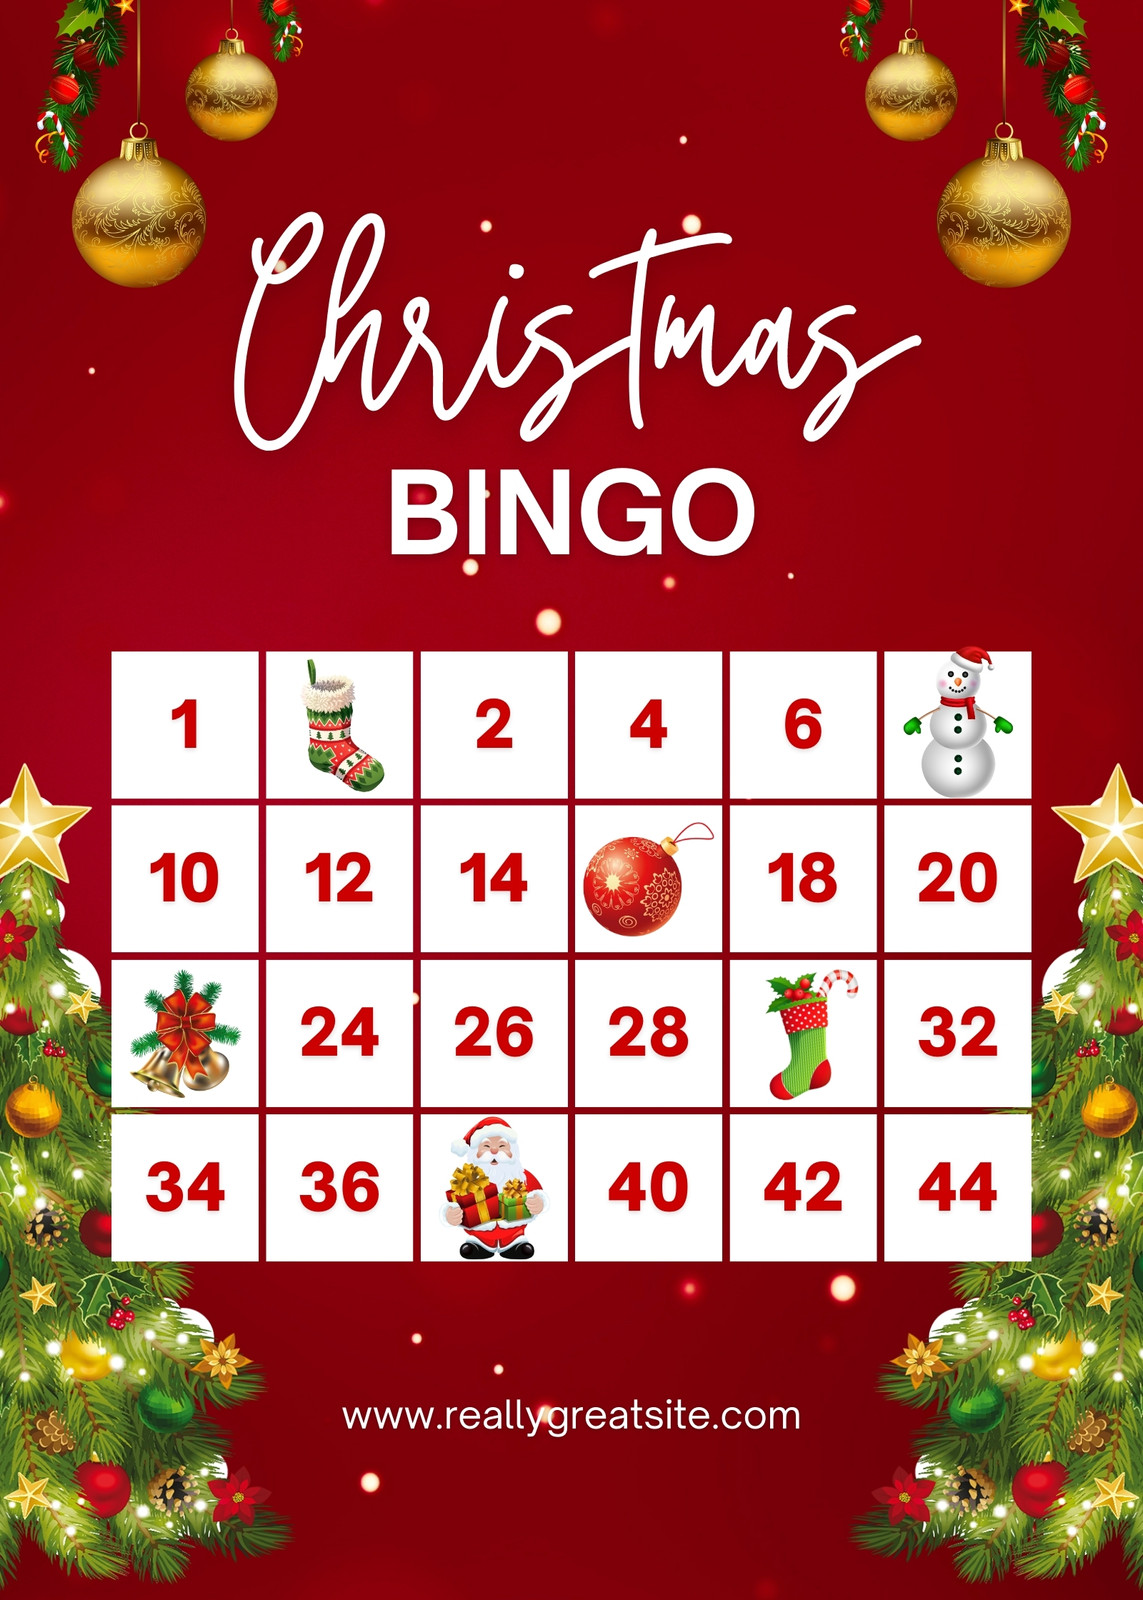 Page 2 - Customize 75+ Christmas Bingo Cards Templates Online - Canva